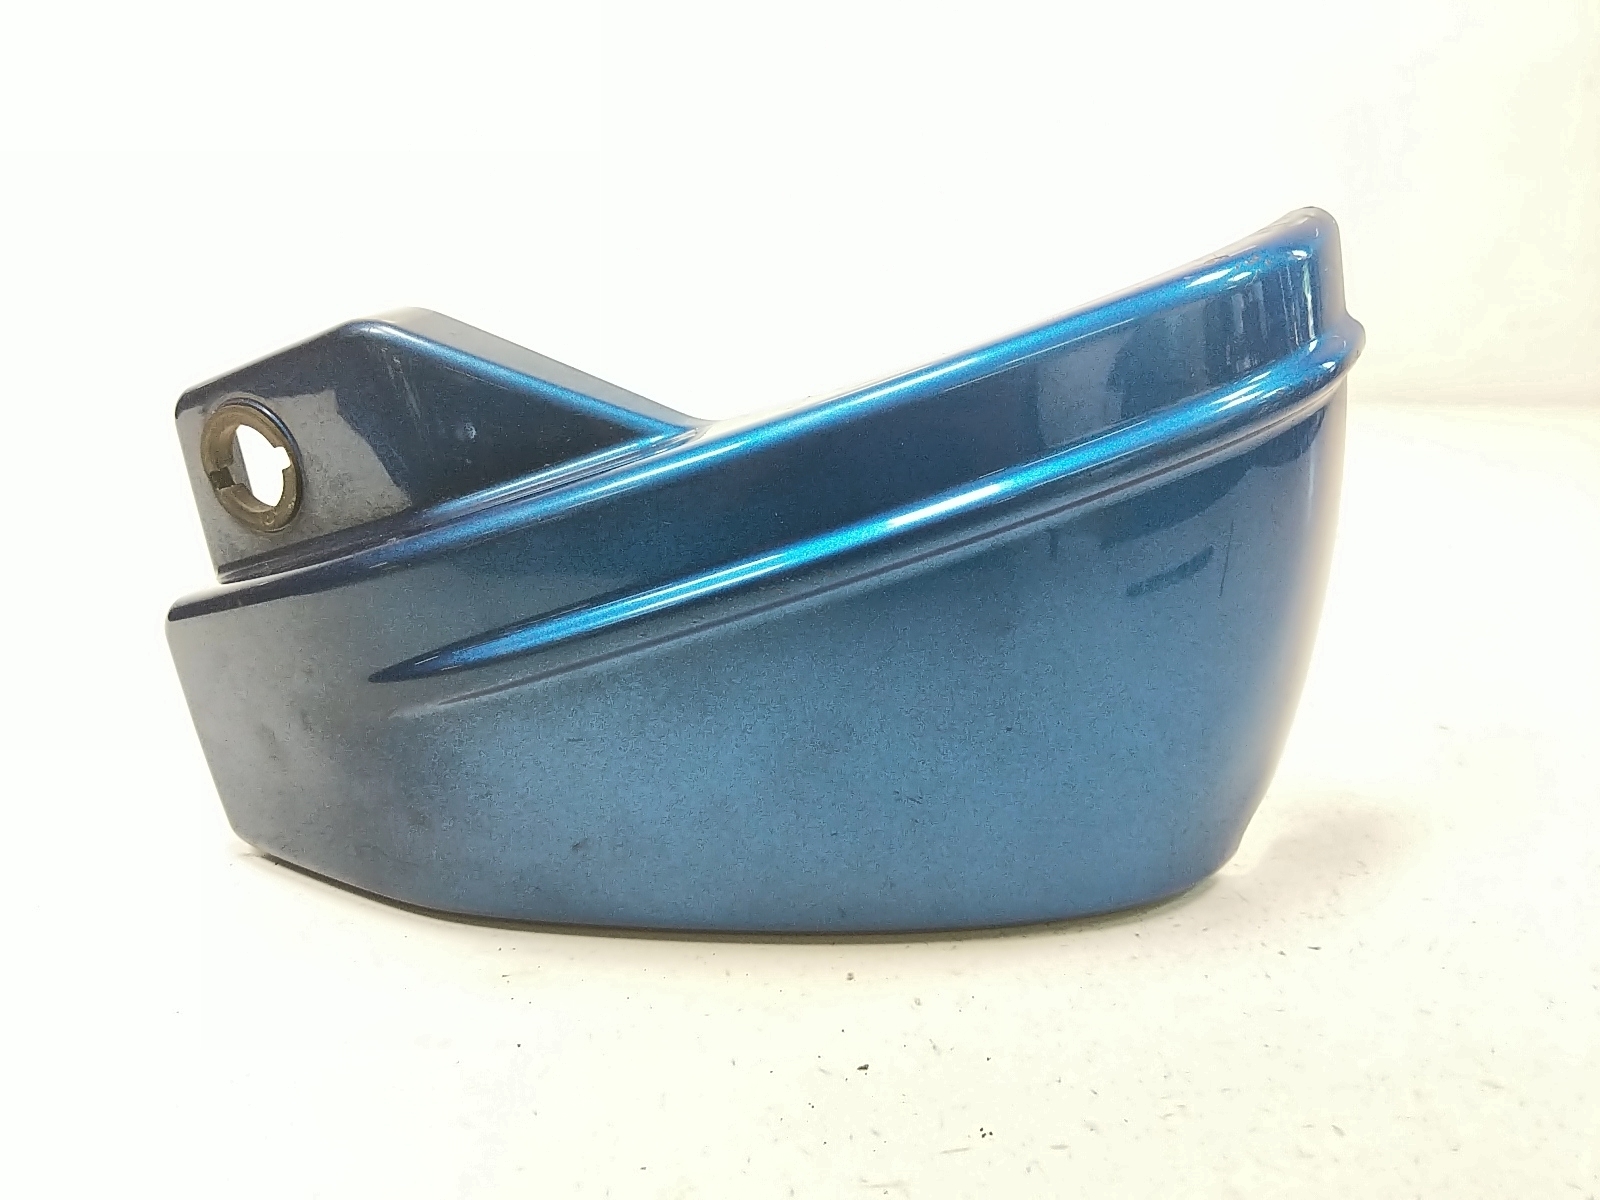 02 Yamaha V Star XVS 650 Blue (Right) Side Cover Lower Seat Panel 4TR-21711-00 O